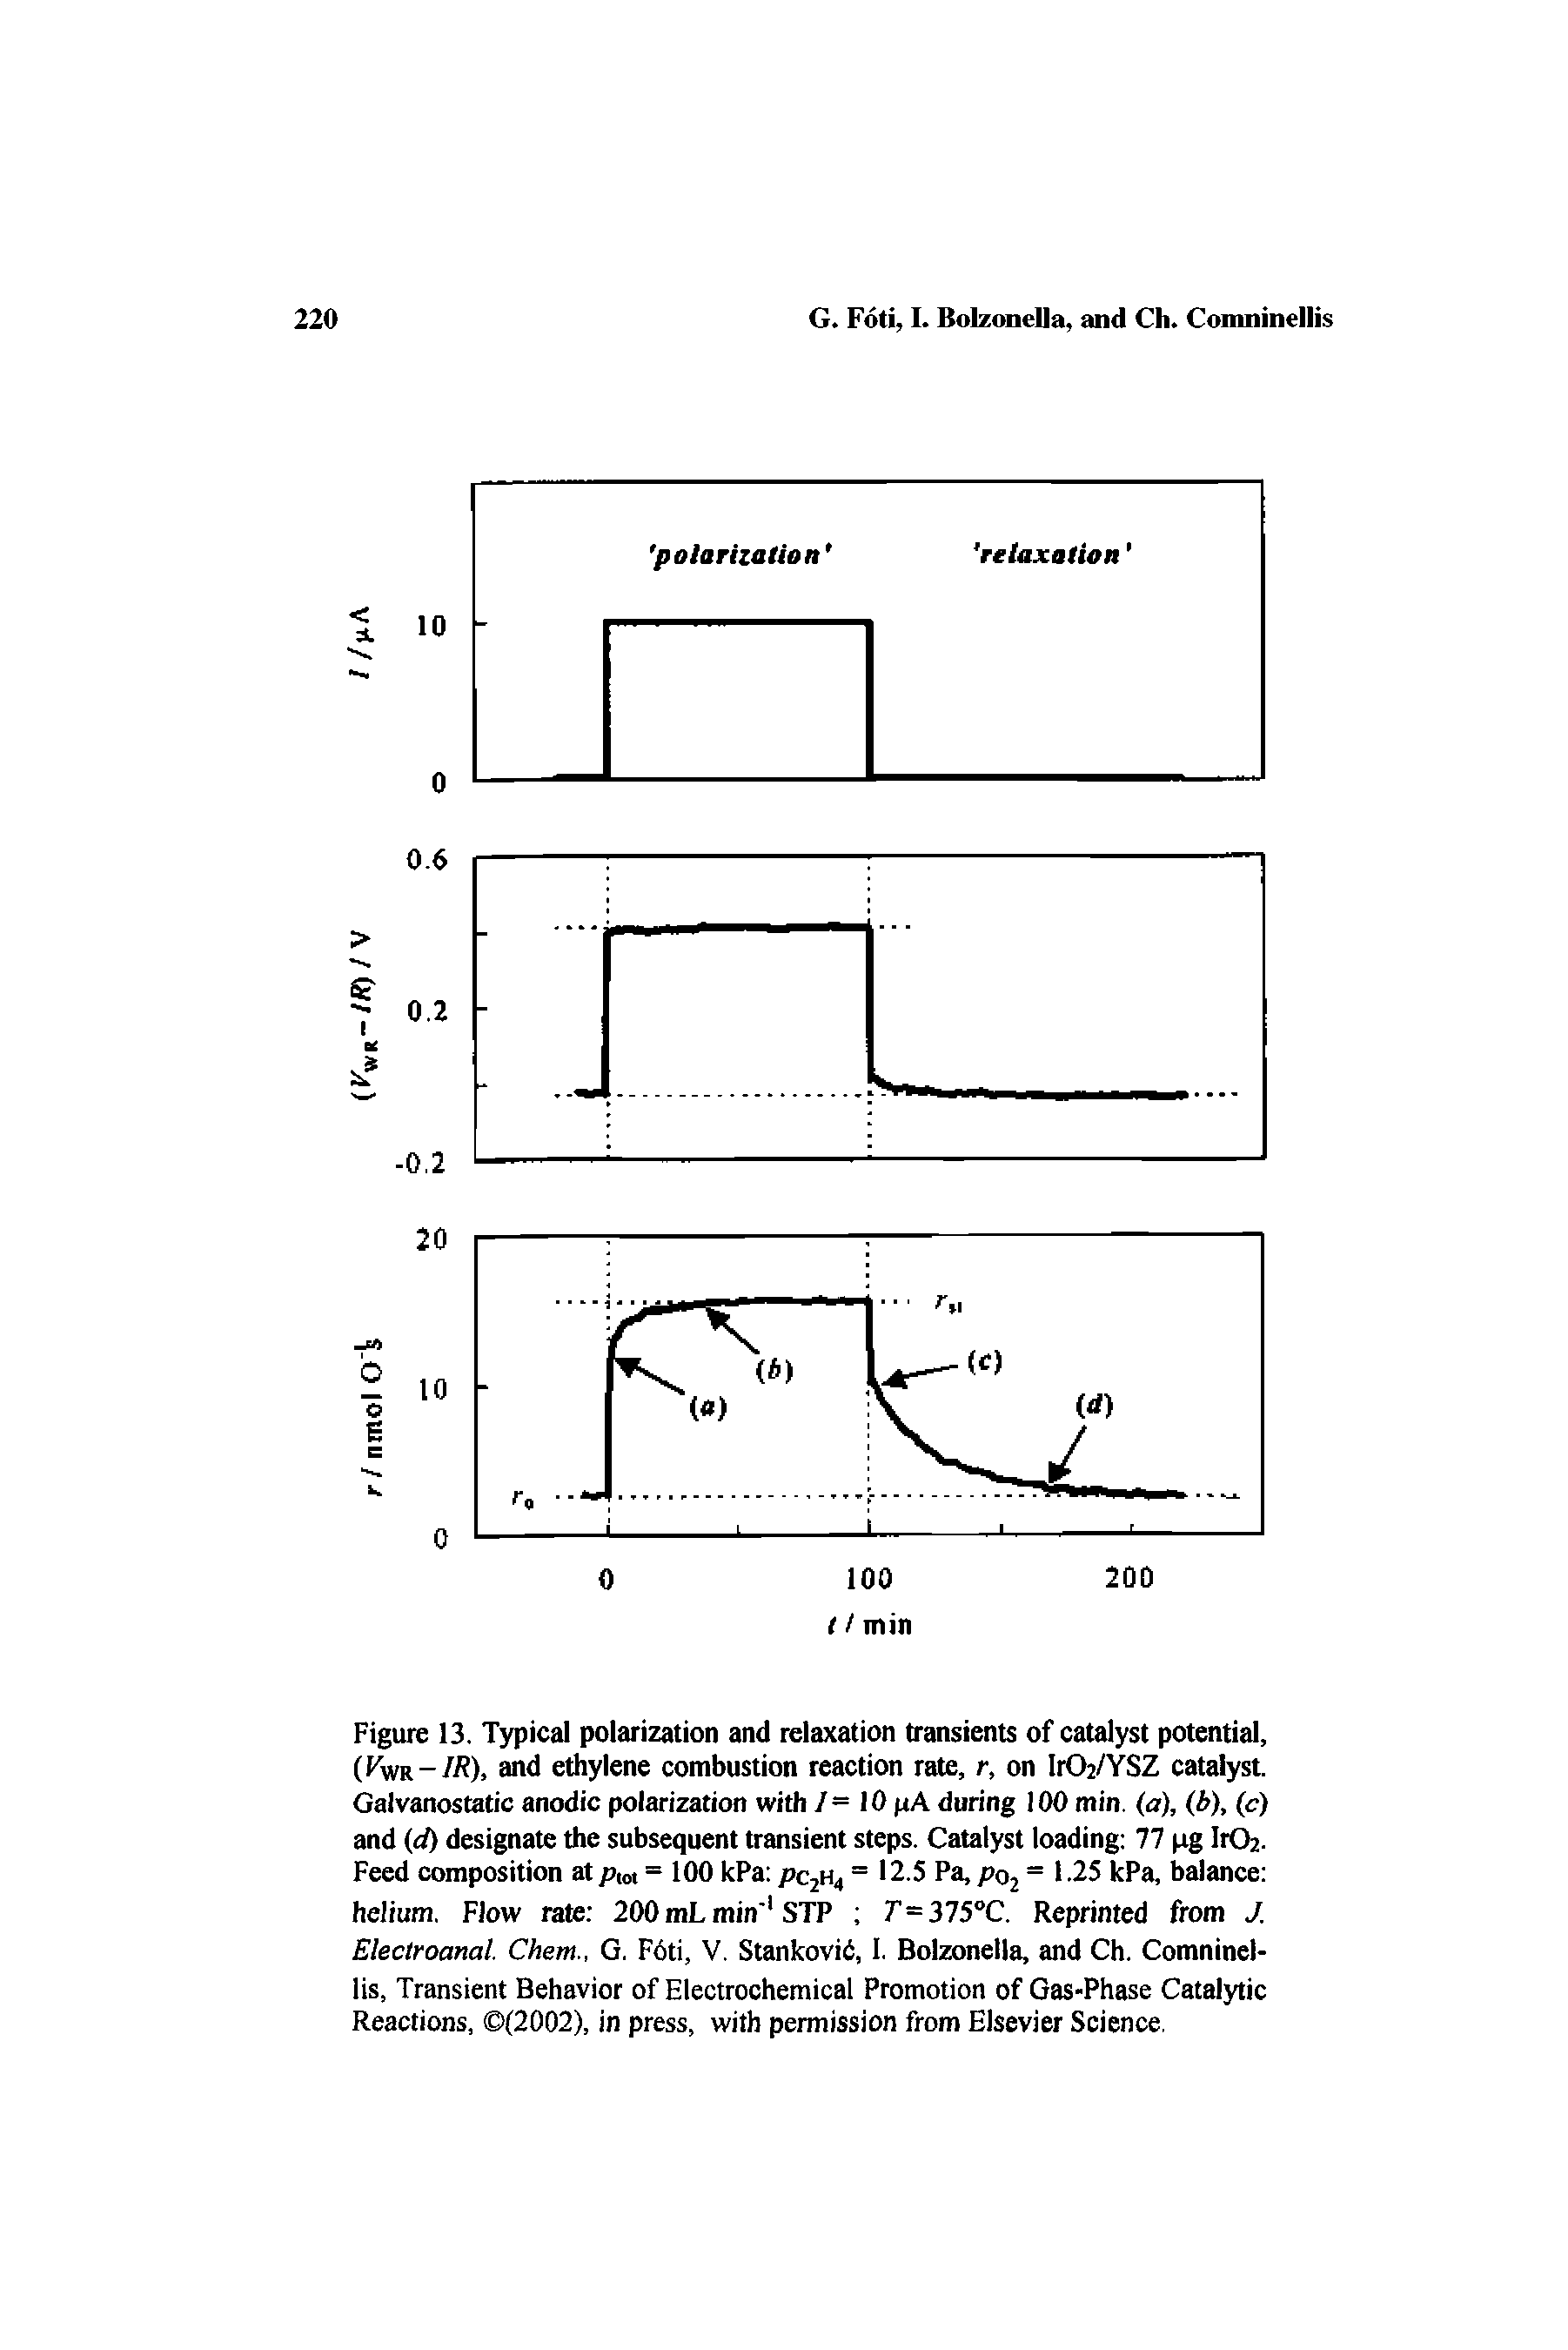 Figure 13. Typical polarization and relaxation transients of catalyst potential, (Fwr-// ), and ethylene combustion reaction rate, r, on Ir02/YSZ catalyst. Galvanostatic anodic polarization with / = 10 pA during 100 min. (a), (b), (c) and (d) designate the subsequent transient steps. Catalyst loading 77 pg IrCh. Feed composition at pm = 100 kPa PC2H4 = 12.5 Pa, - 1.25 kPa, balance helium. Flow rate 200 mL min" STP 7 =375°C. Reprinted from J. Electroanal. Chem., Q. F6ti, V. Stankovii, I. BolzoneUa, and Ch. Comninel-lis. Transient Behavior of Electrochemical Promotion of Gas-Phase Catalytic Reactions, (2002), in press, with permission from Elsevier Science,...